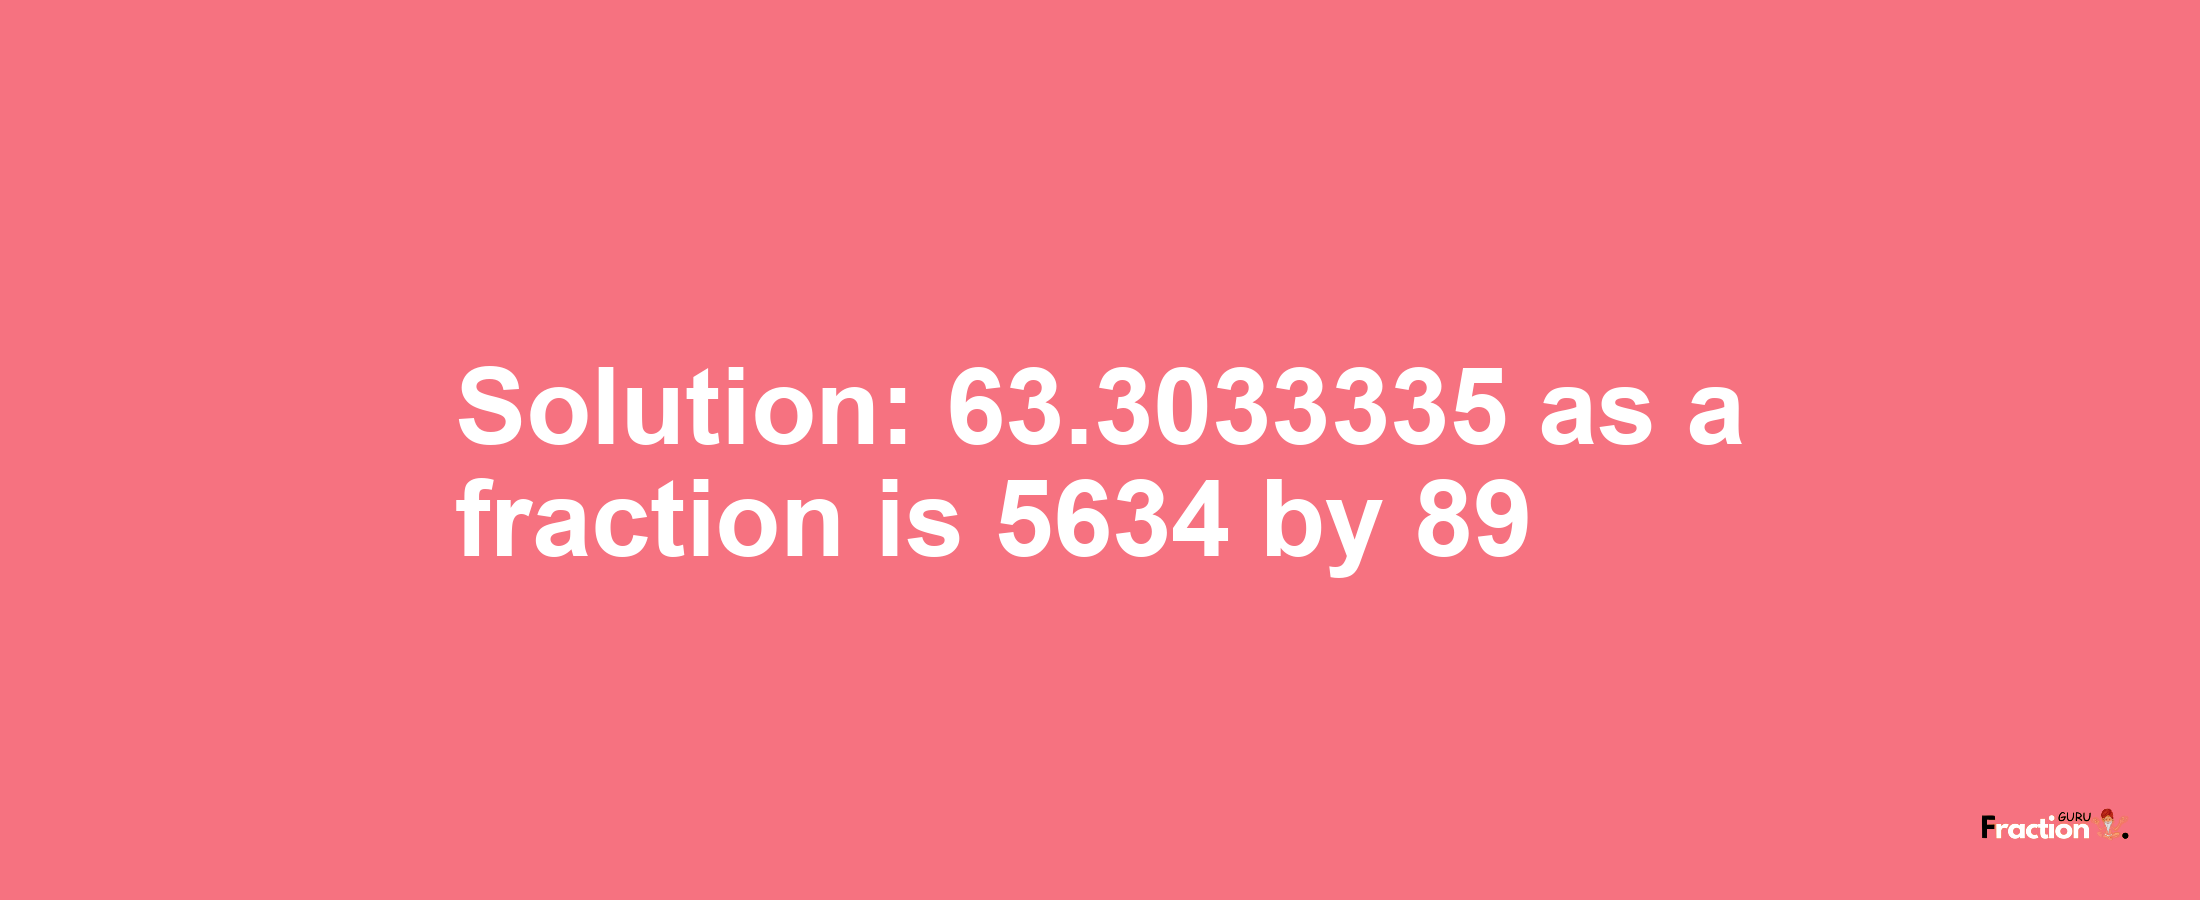 Solution:63.3033335 as a fraction is 5634/89